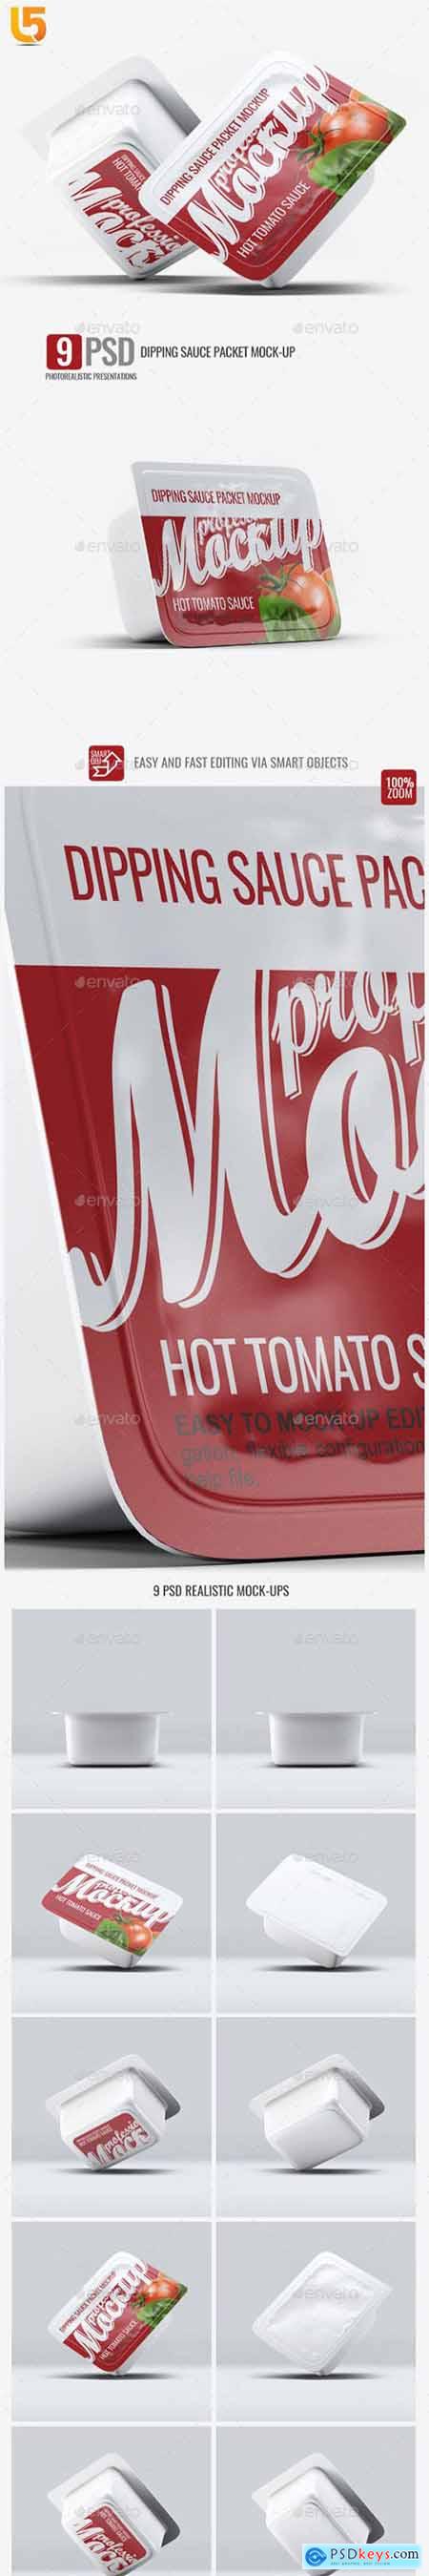 Graphicriver Dipping Sauce Packet Mock-Up